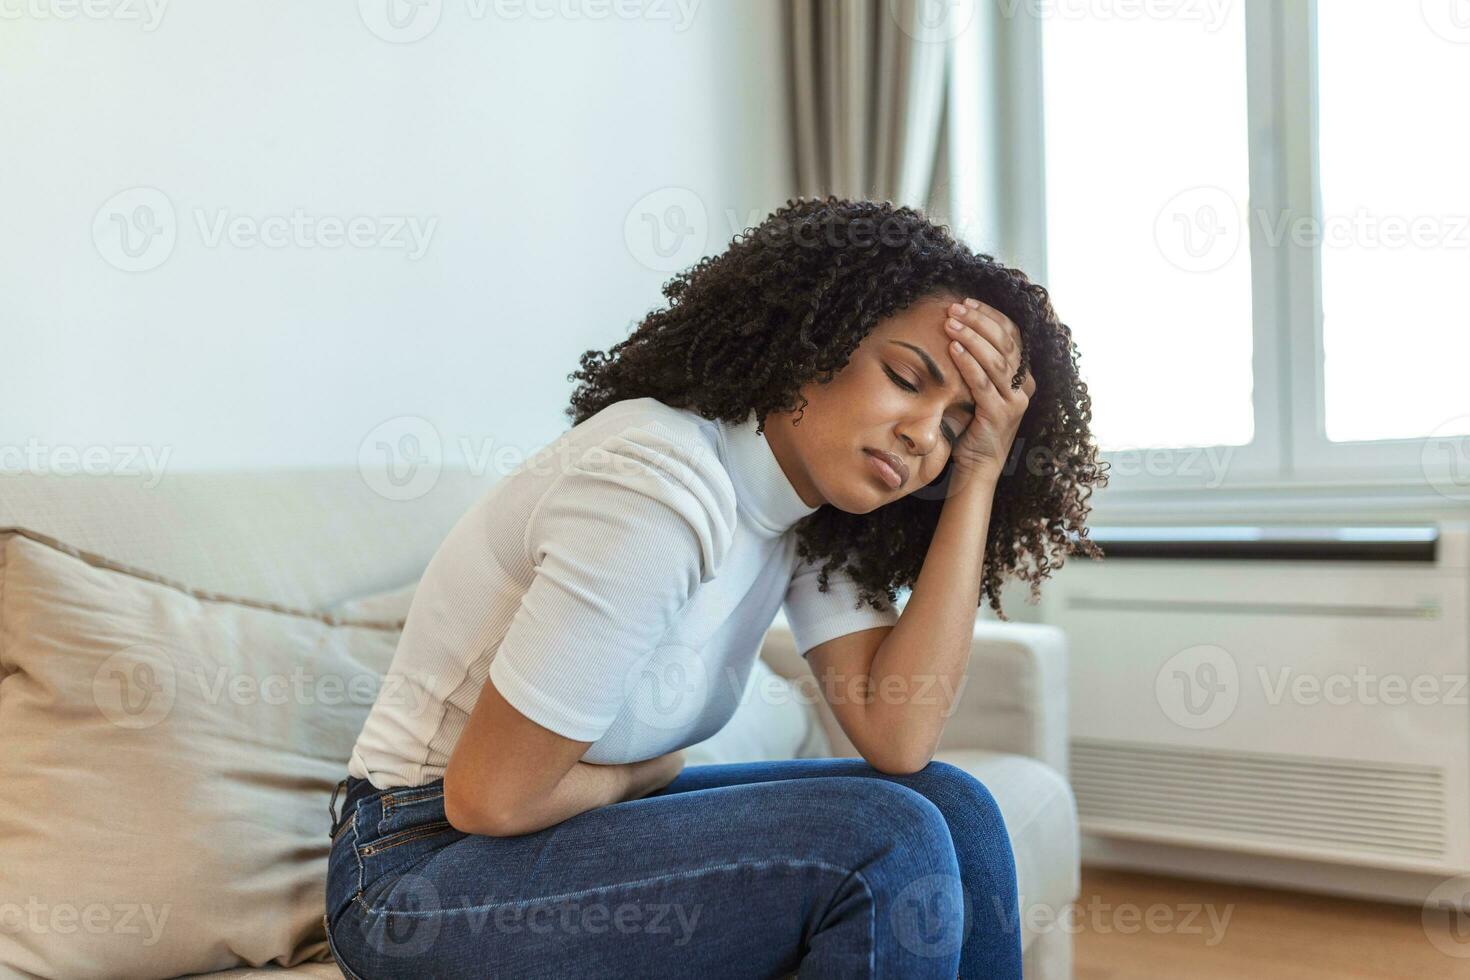 Woman in painful expression holding hands against belly suffering menstrual period pain, lying sad on home bed, having tummy cramp in female health concept photo